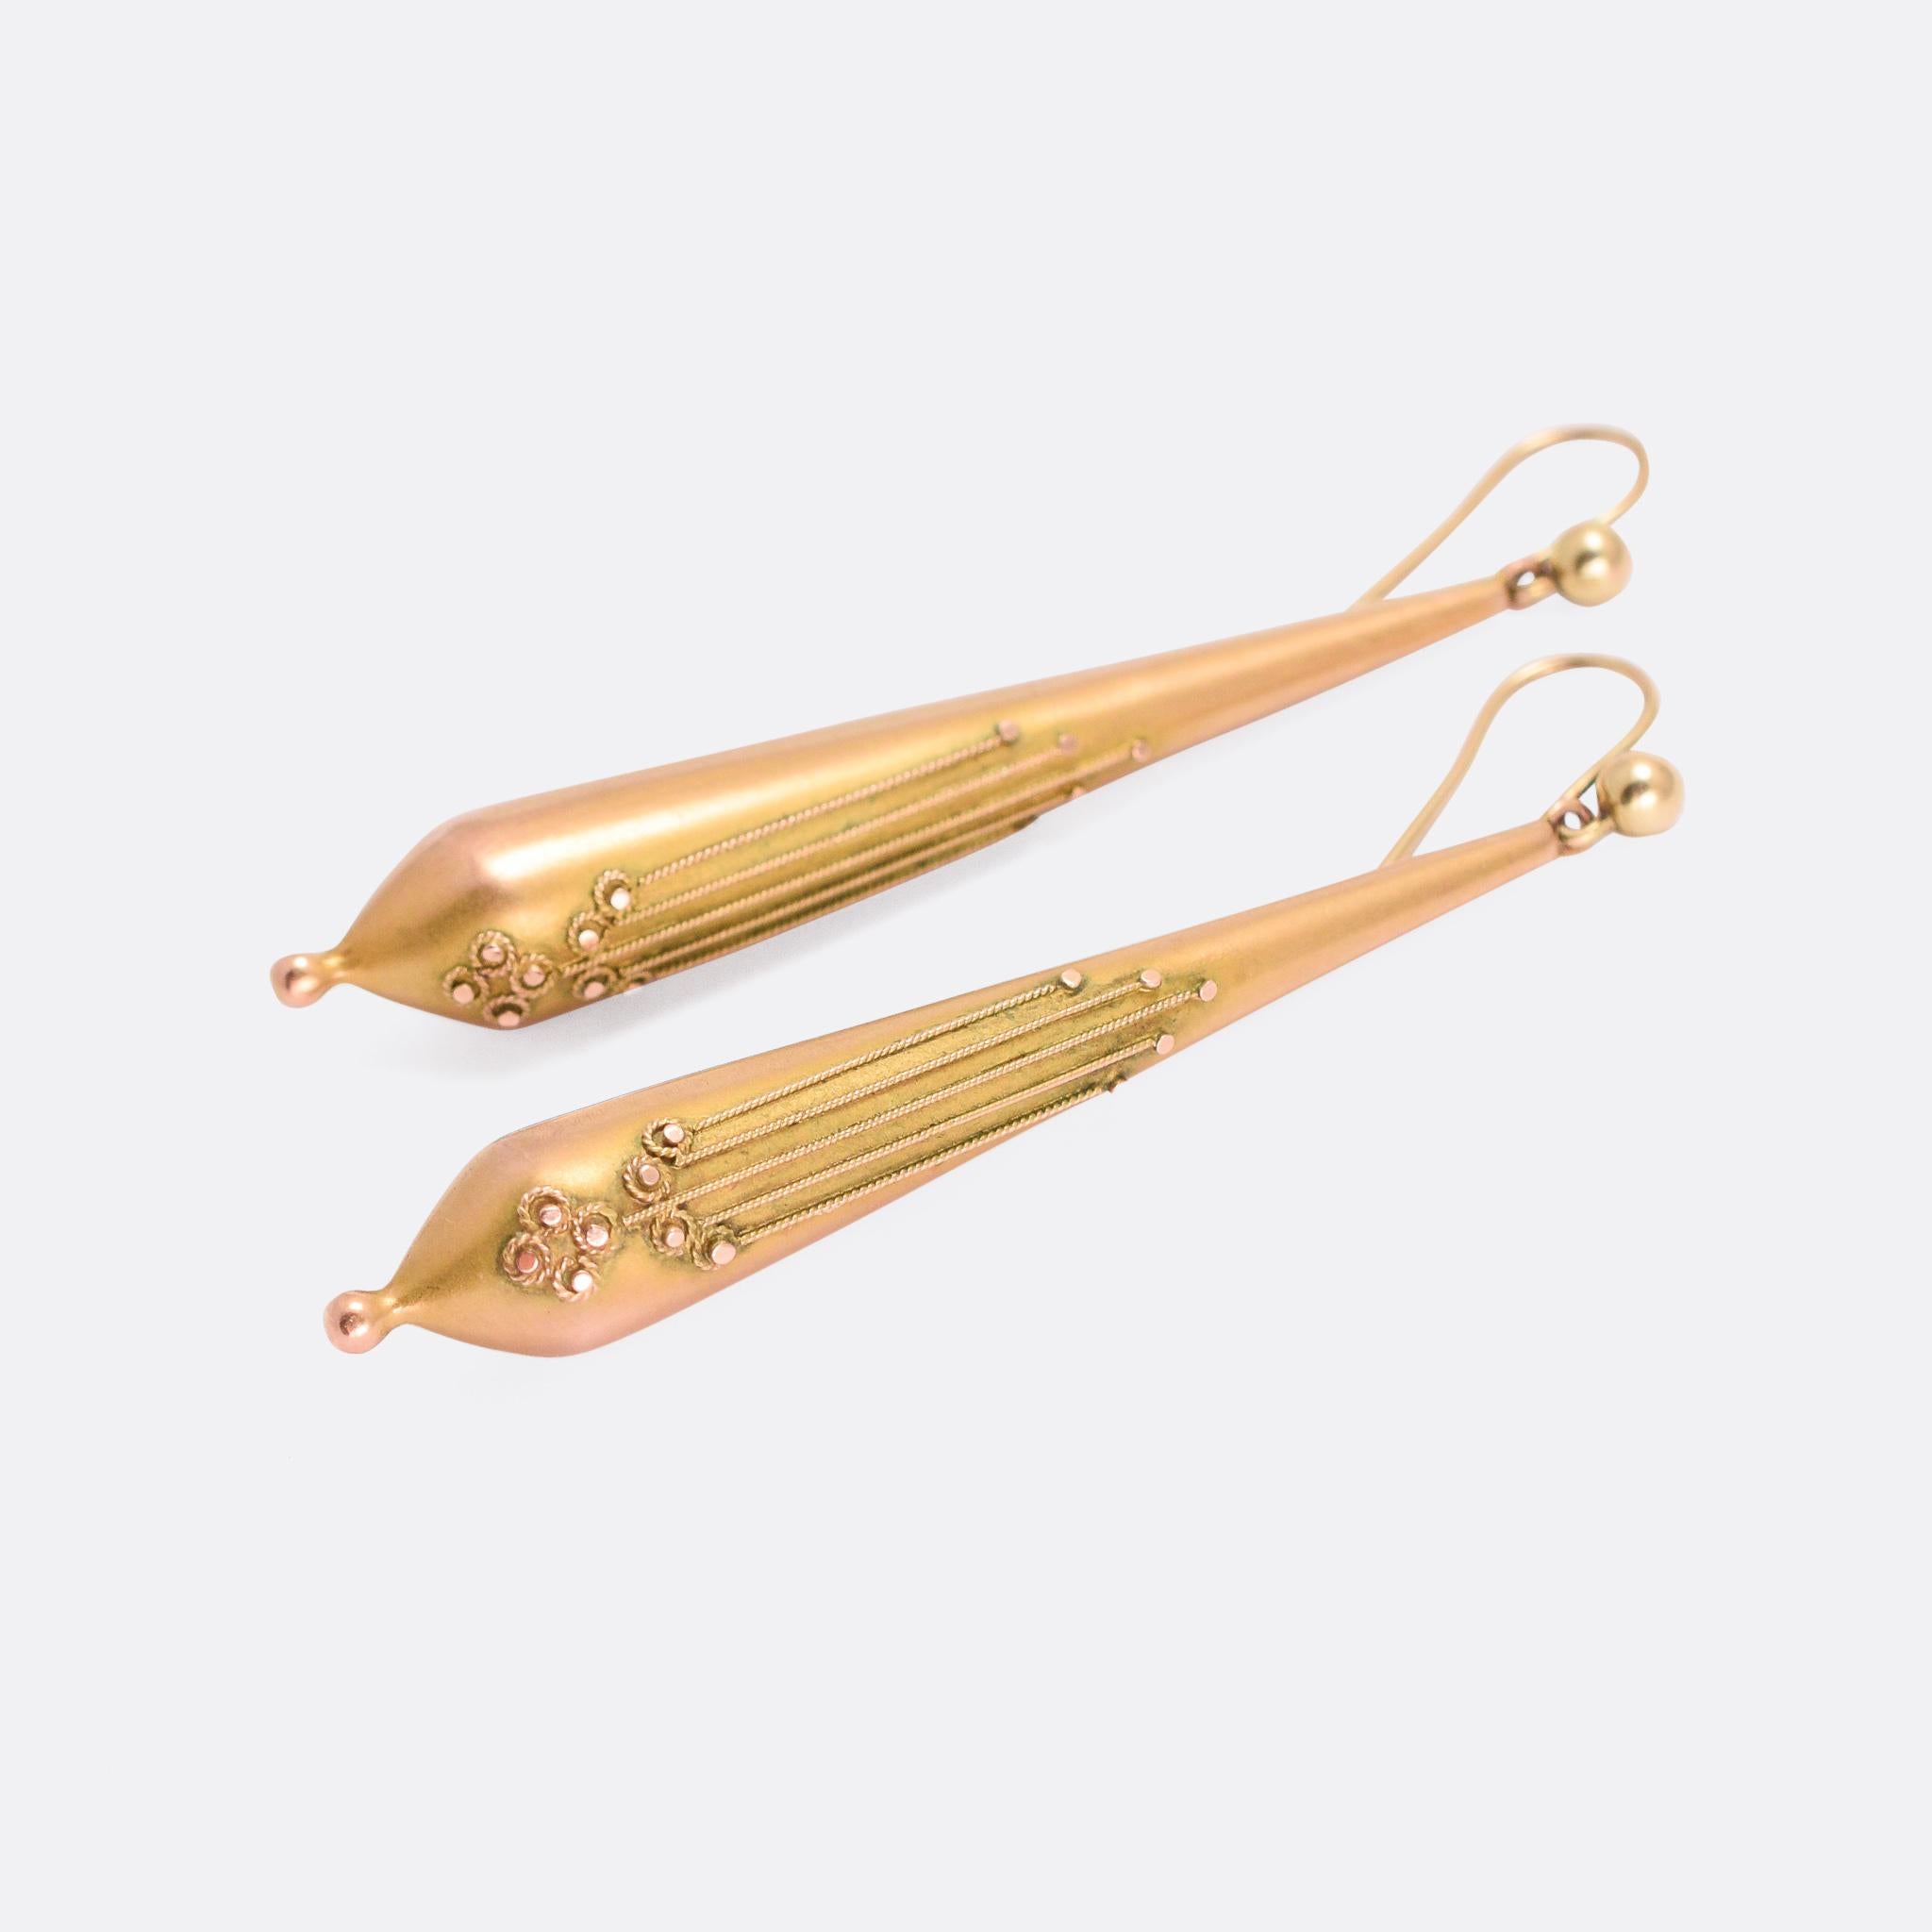 A gorgeous pair of Etruscan Revival torpedo earrings crafted in 9 karat yellow gold. They feature applied ropework detailing, and have aqcuired a lovely antique patina over the years. They're a good size (5.7cm length) and date from the